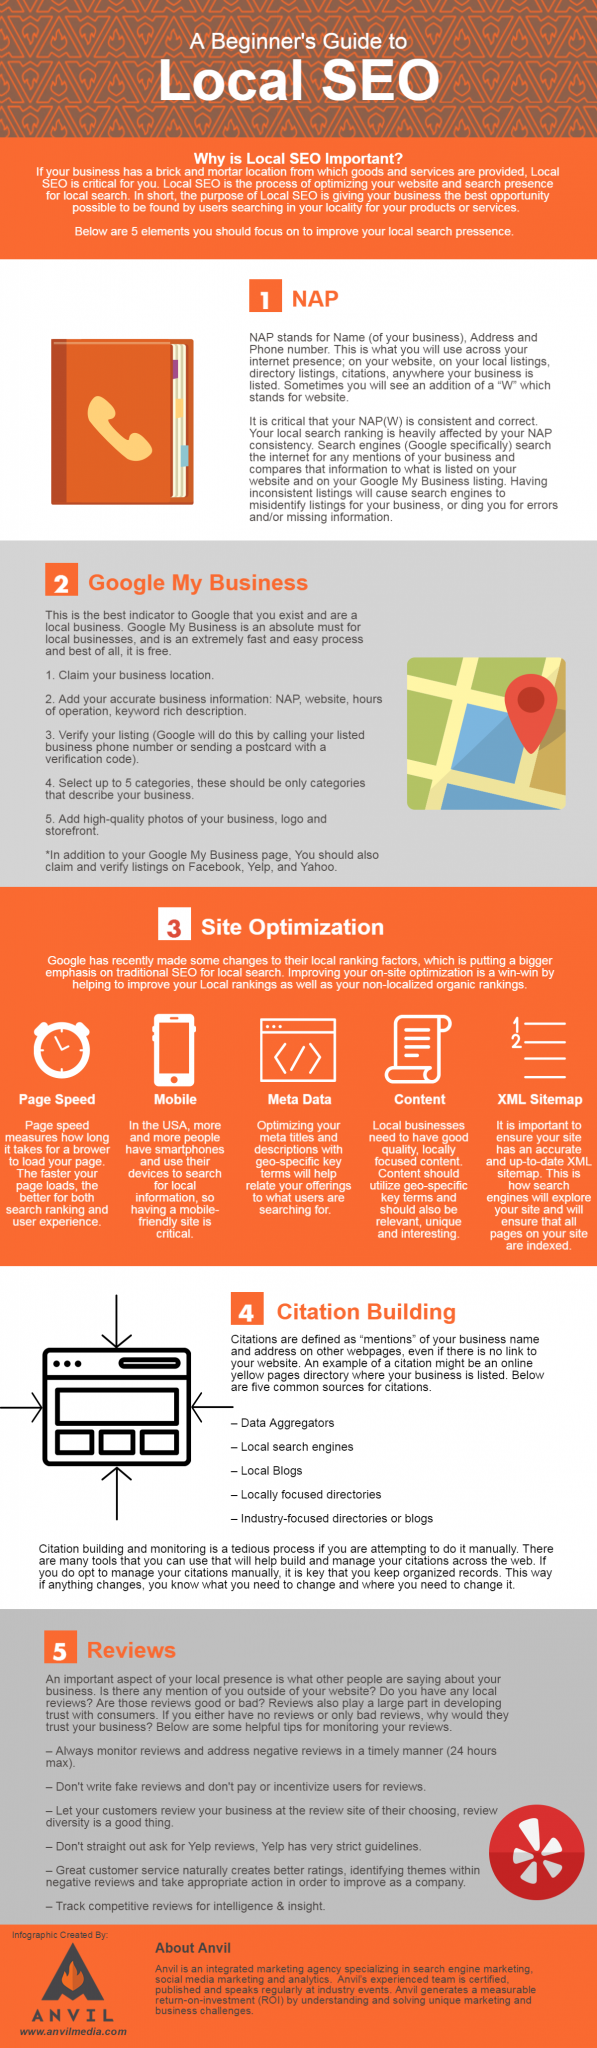 How does Google Rank Websites? A Beginner's Guide to Google Search